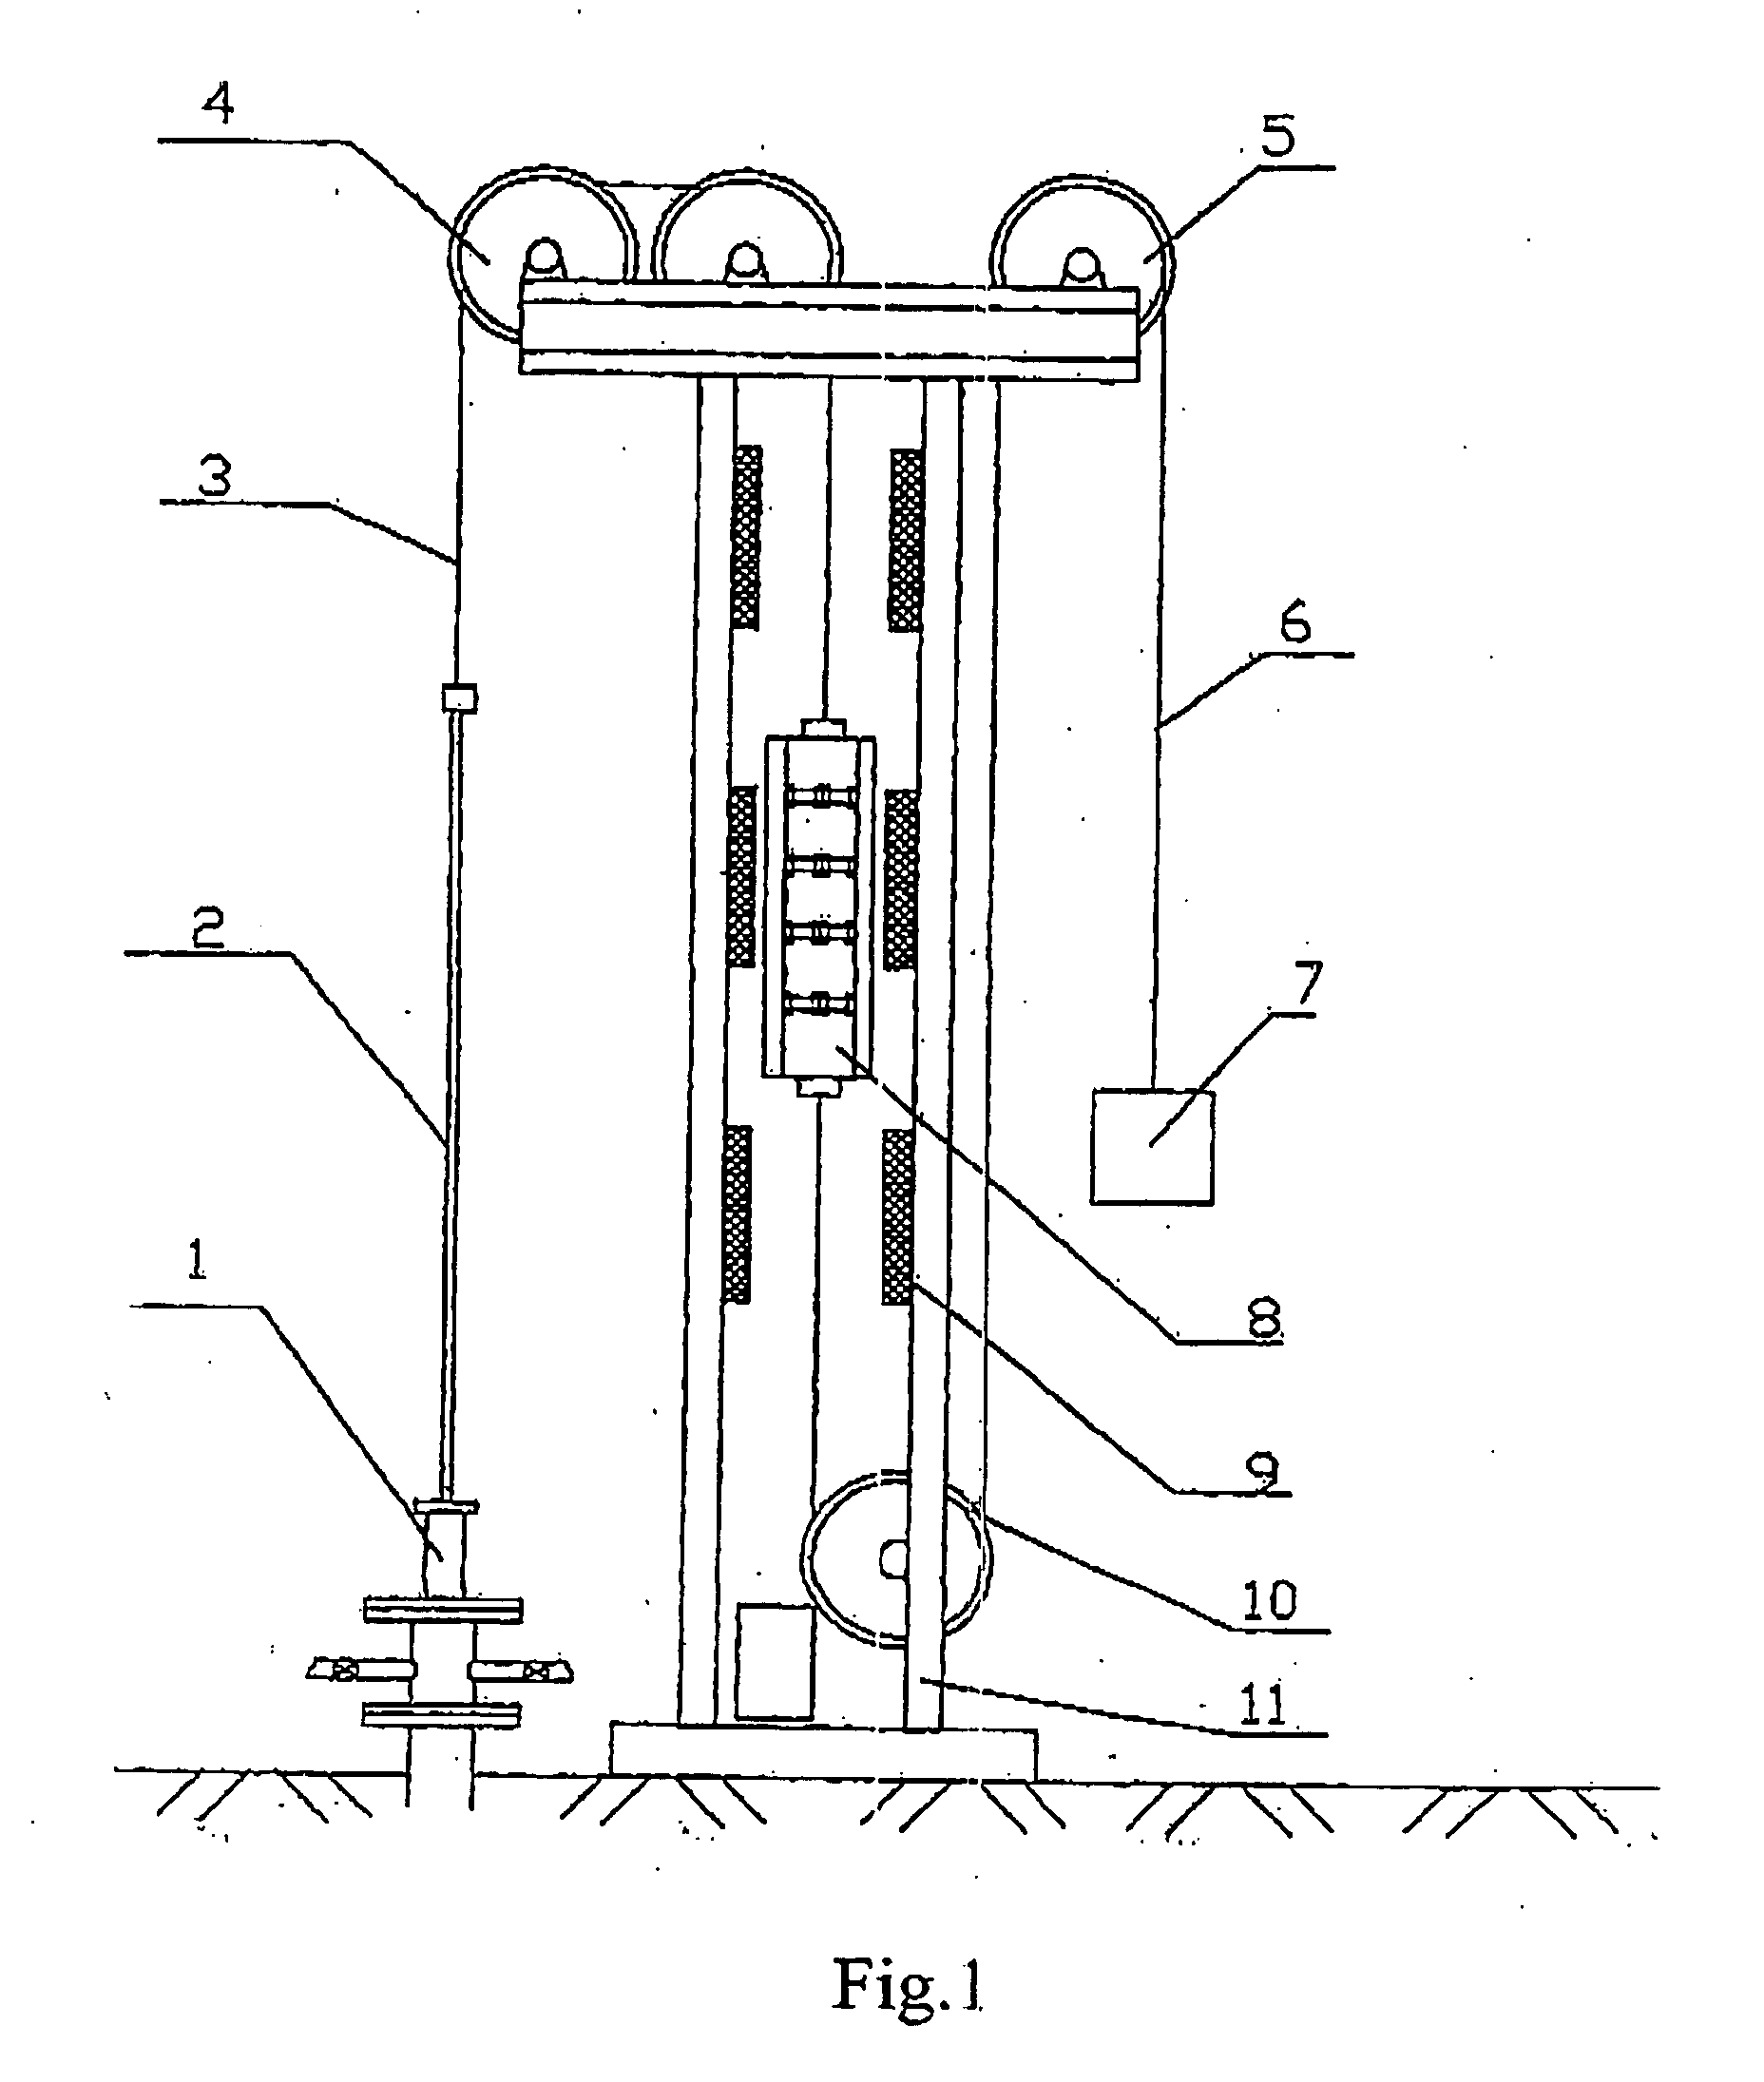 Pumping unit driven by a linear electric motor